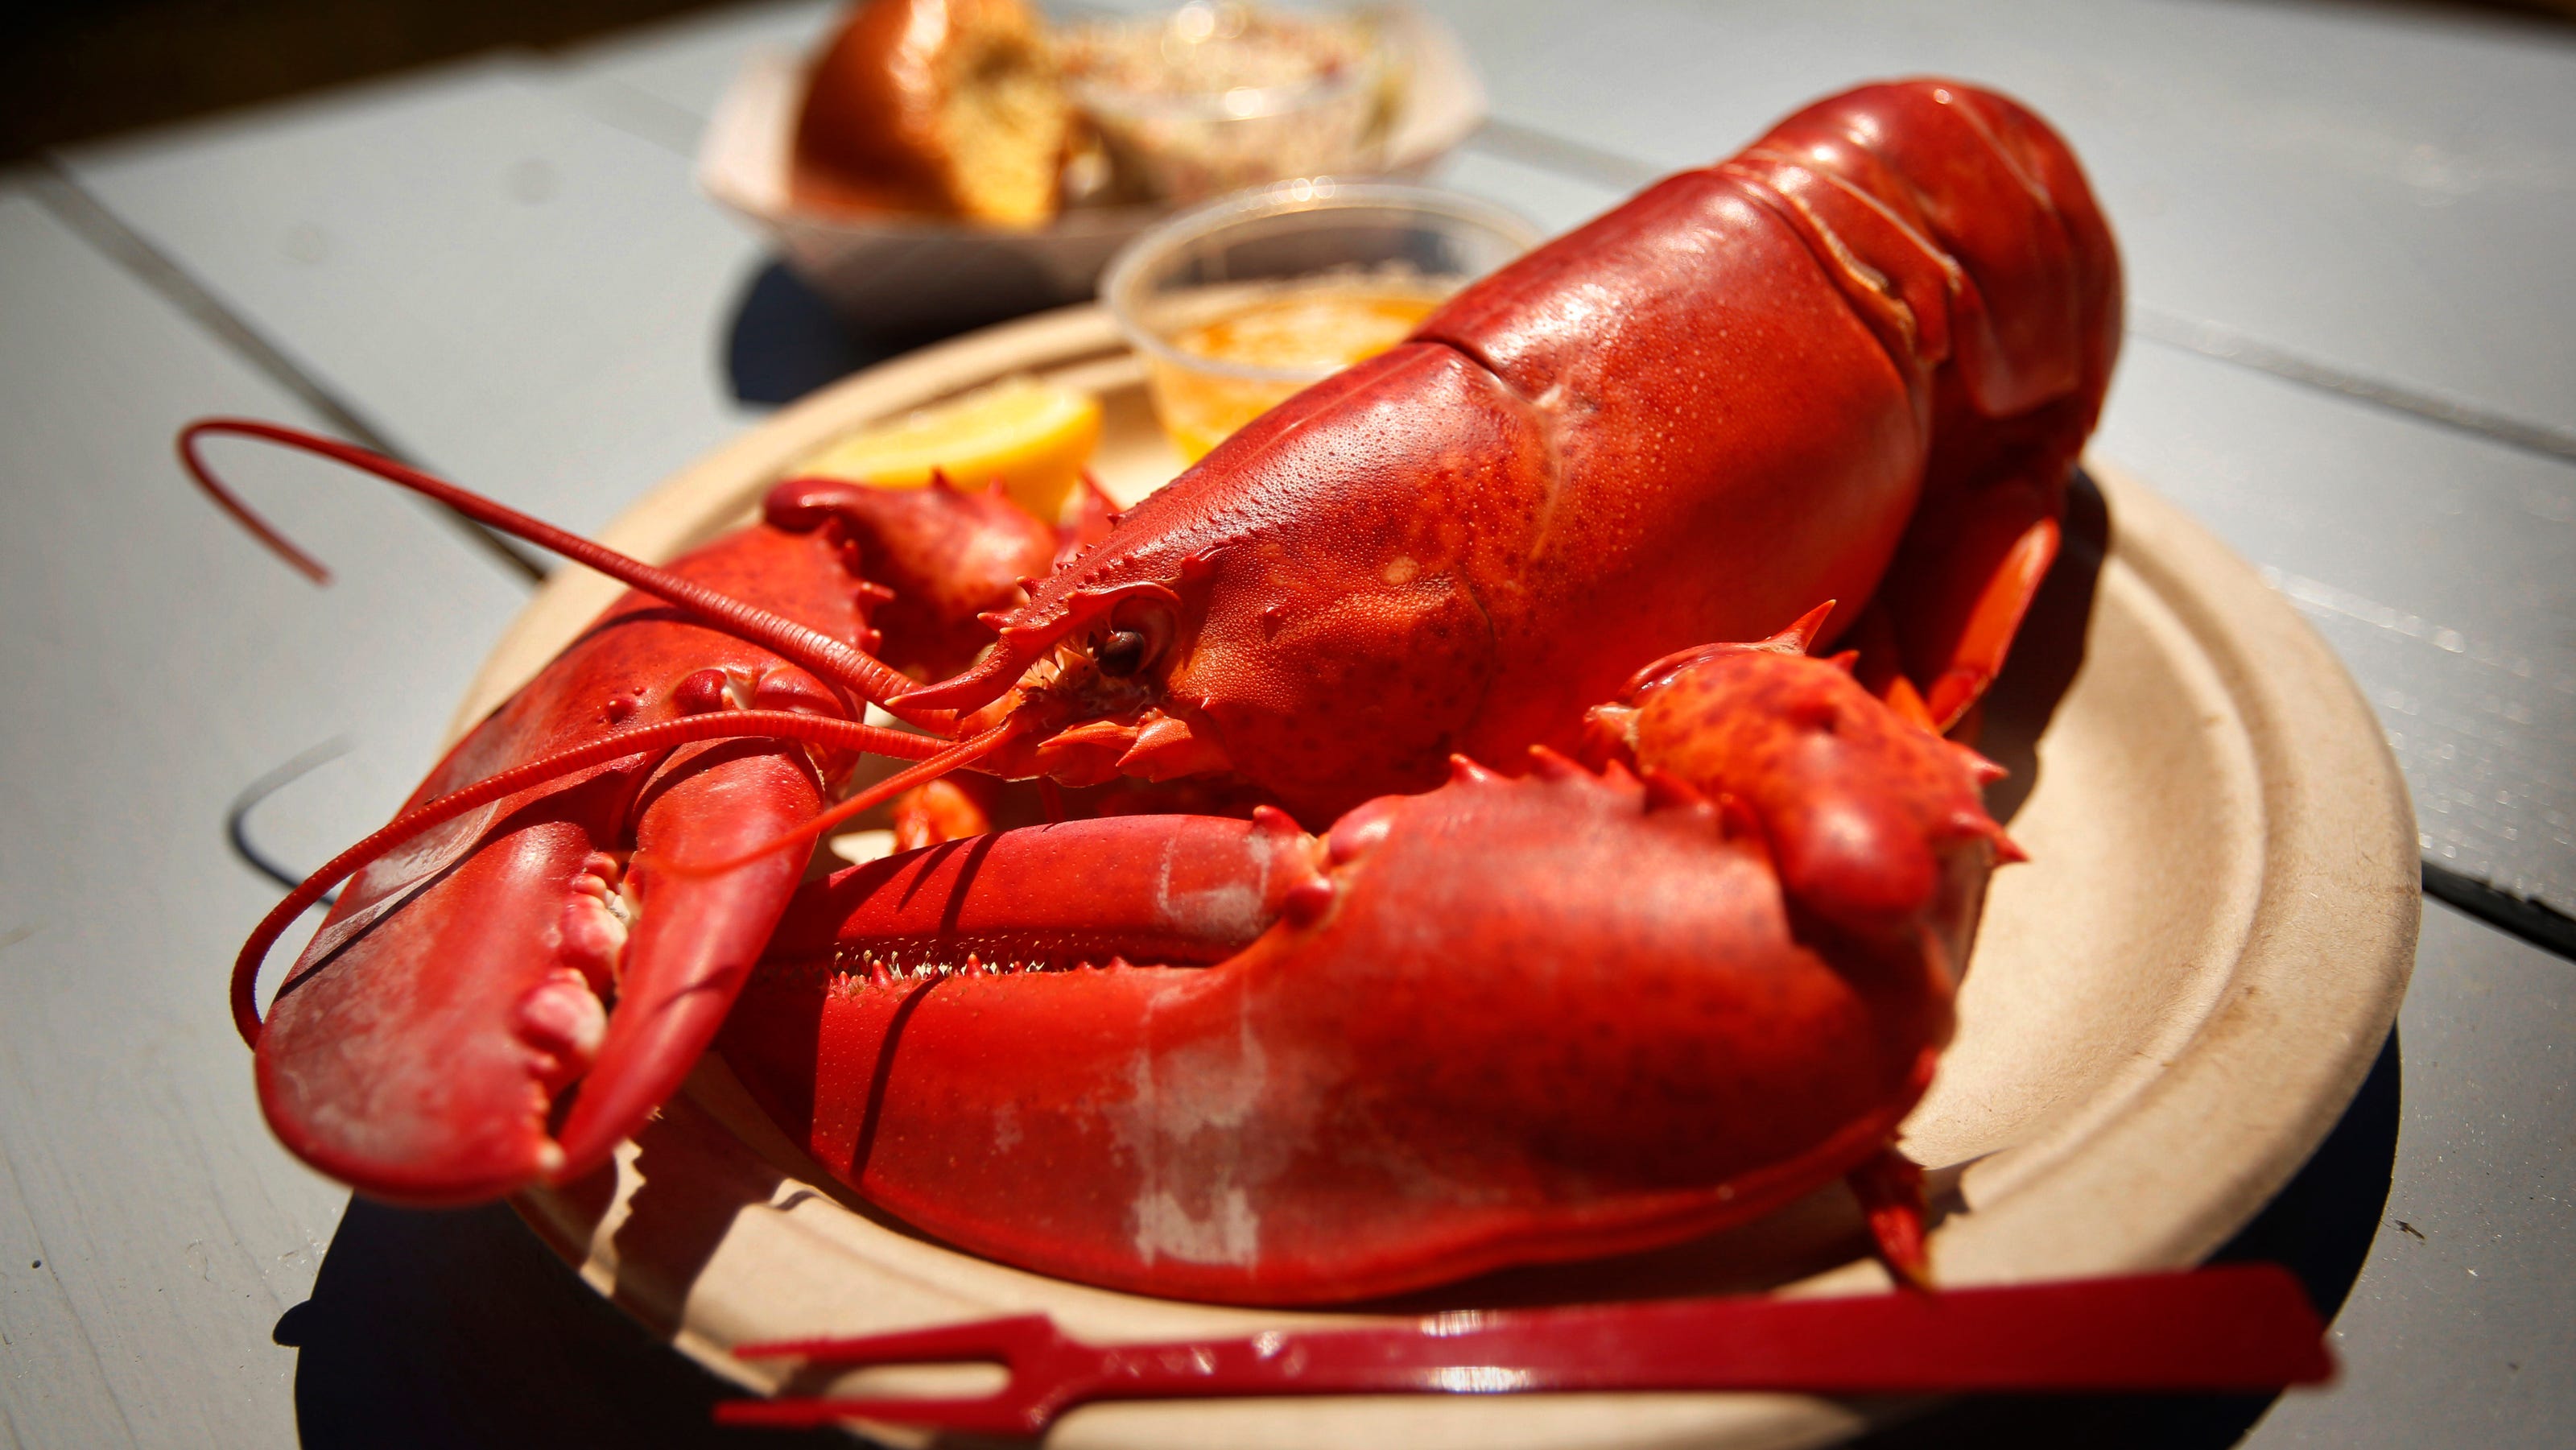 Lobster is a delicacy, but how do you eat it? Let us show you.